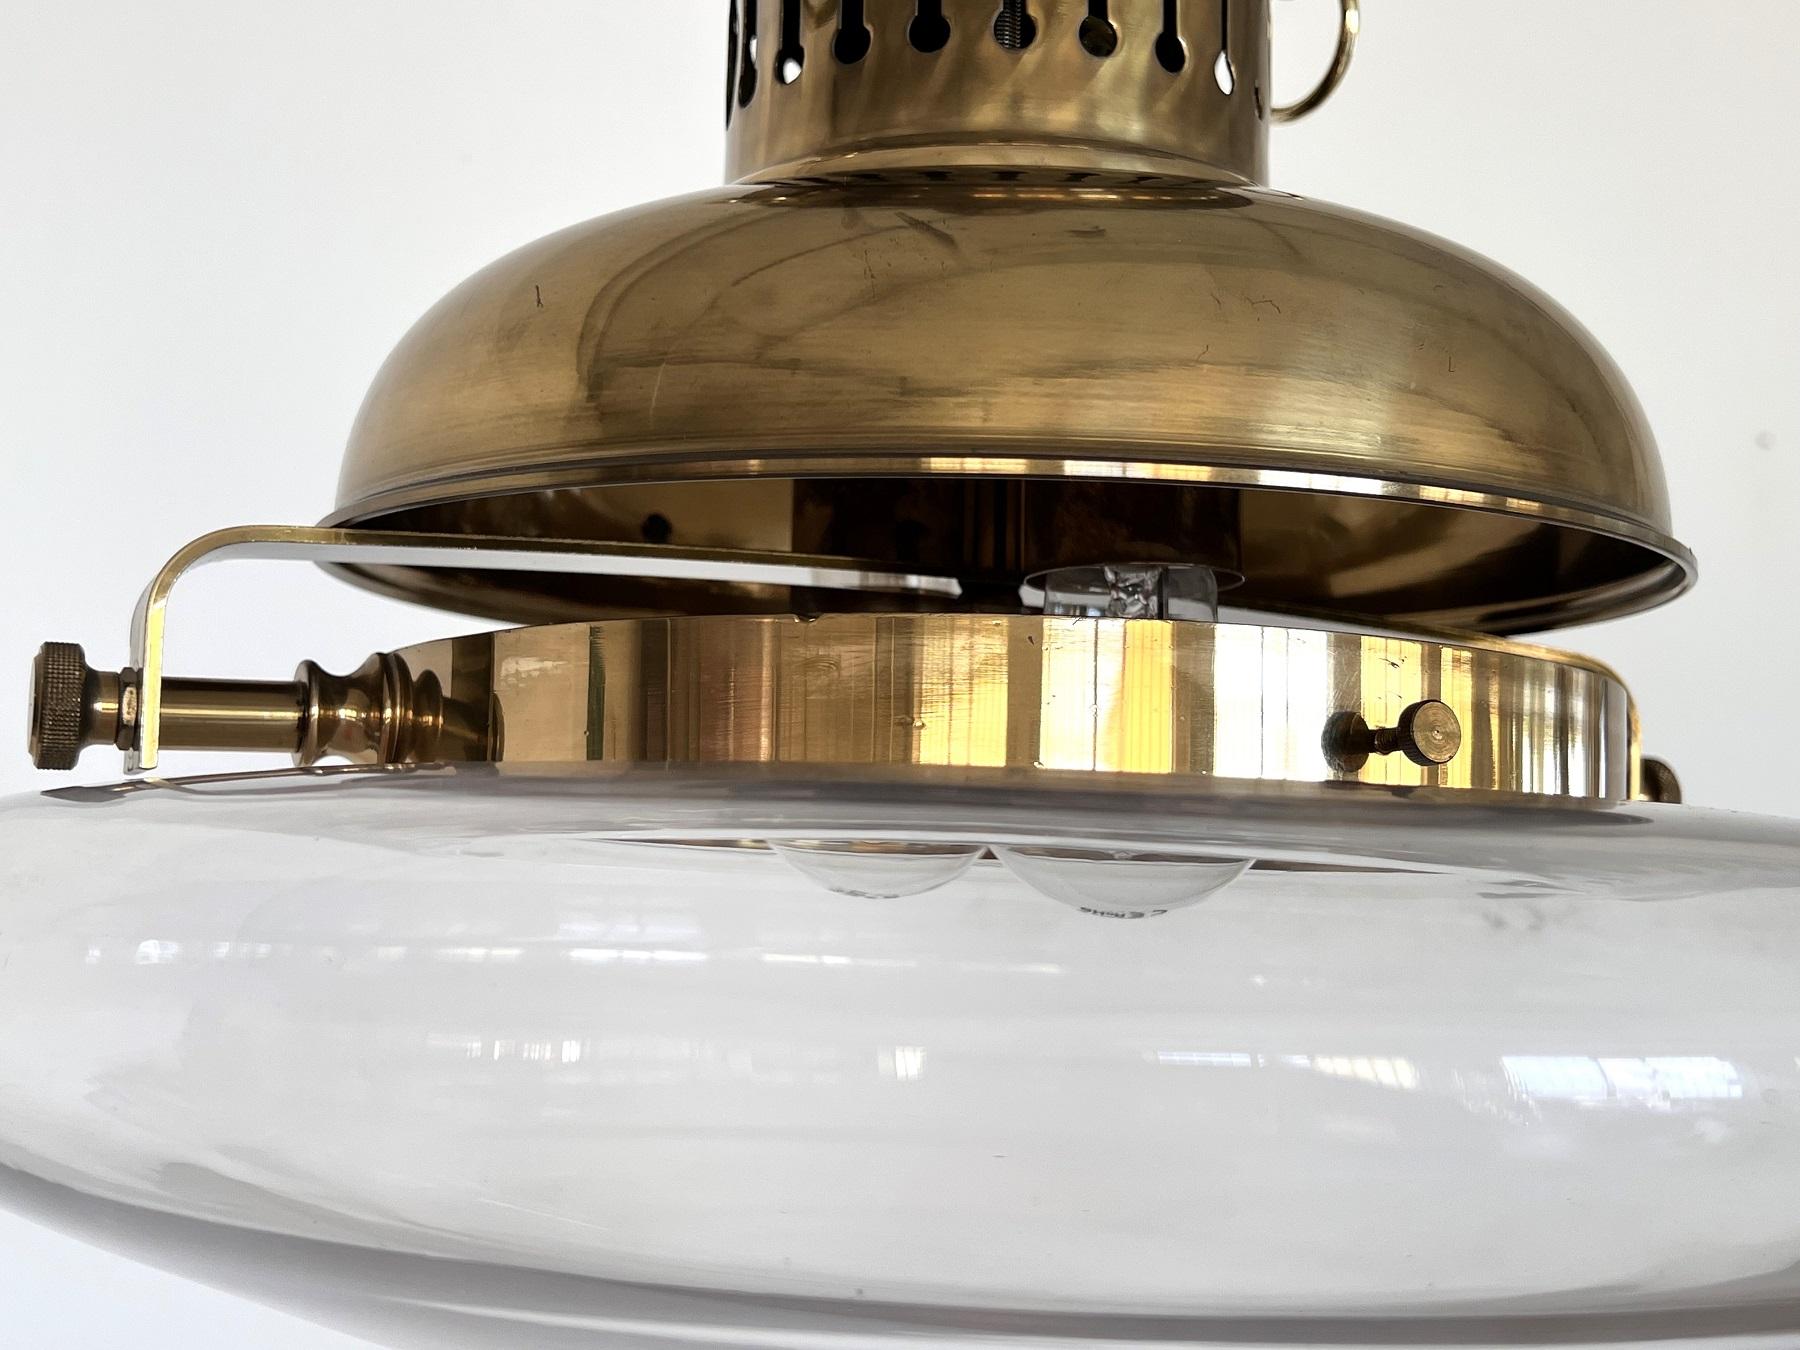 Italian Brass and Glass Pendant Lamp or Lantern in Nautical Style, 1970s For Sale 5